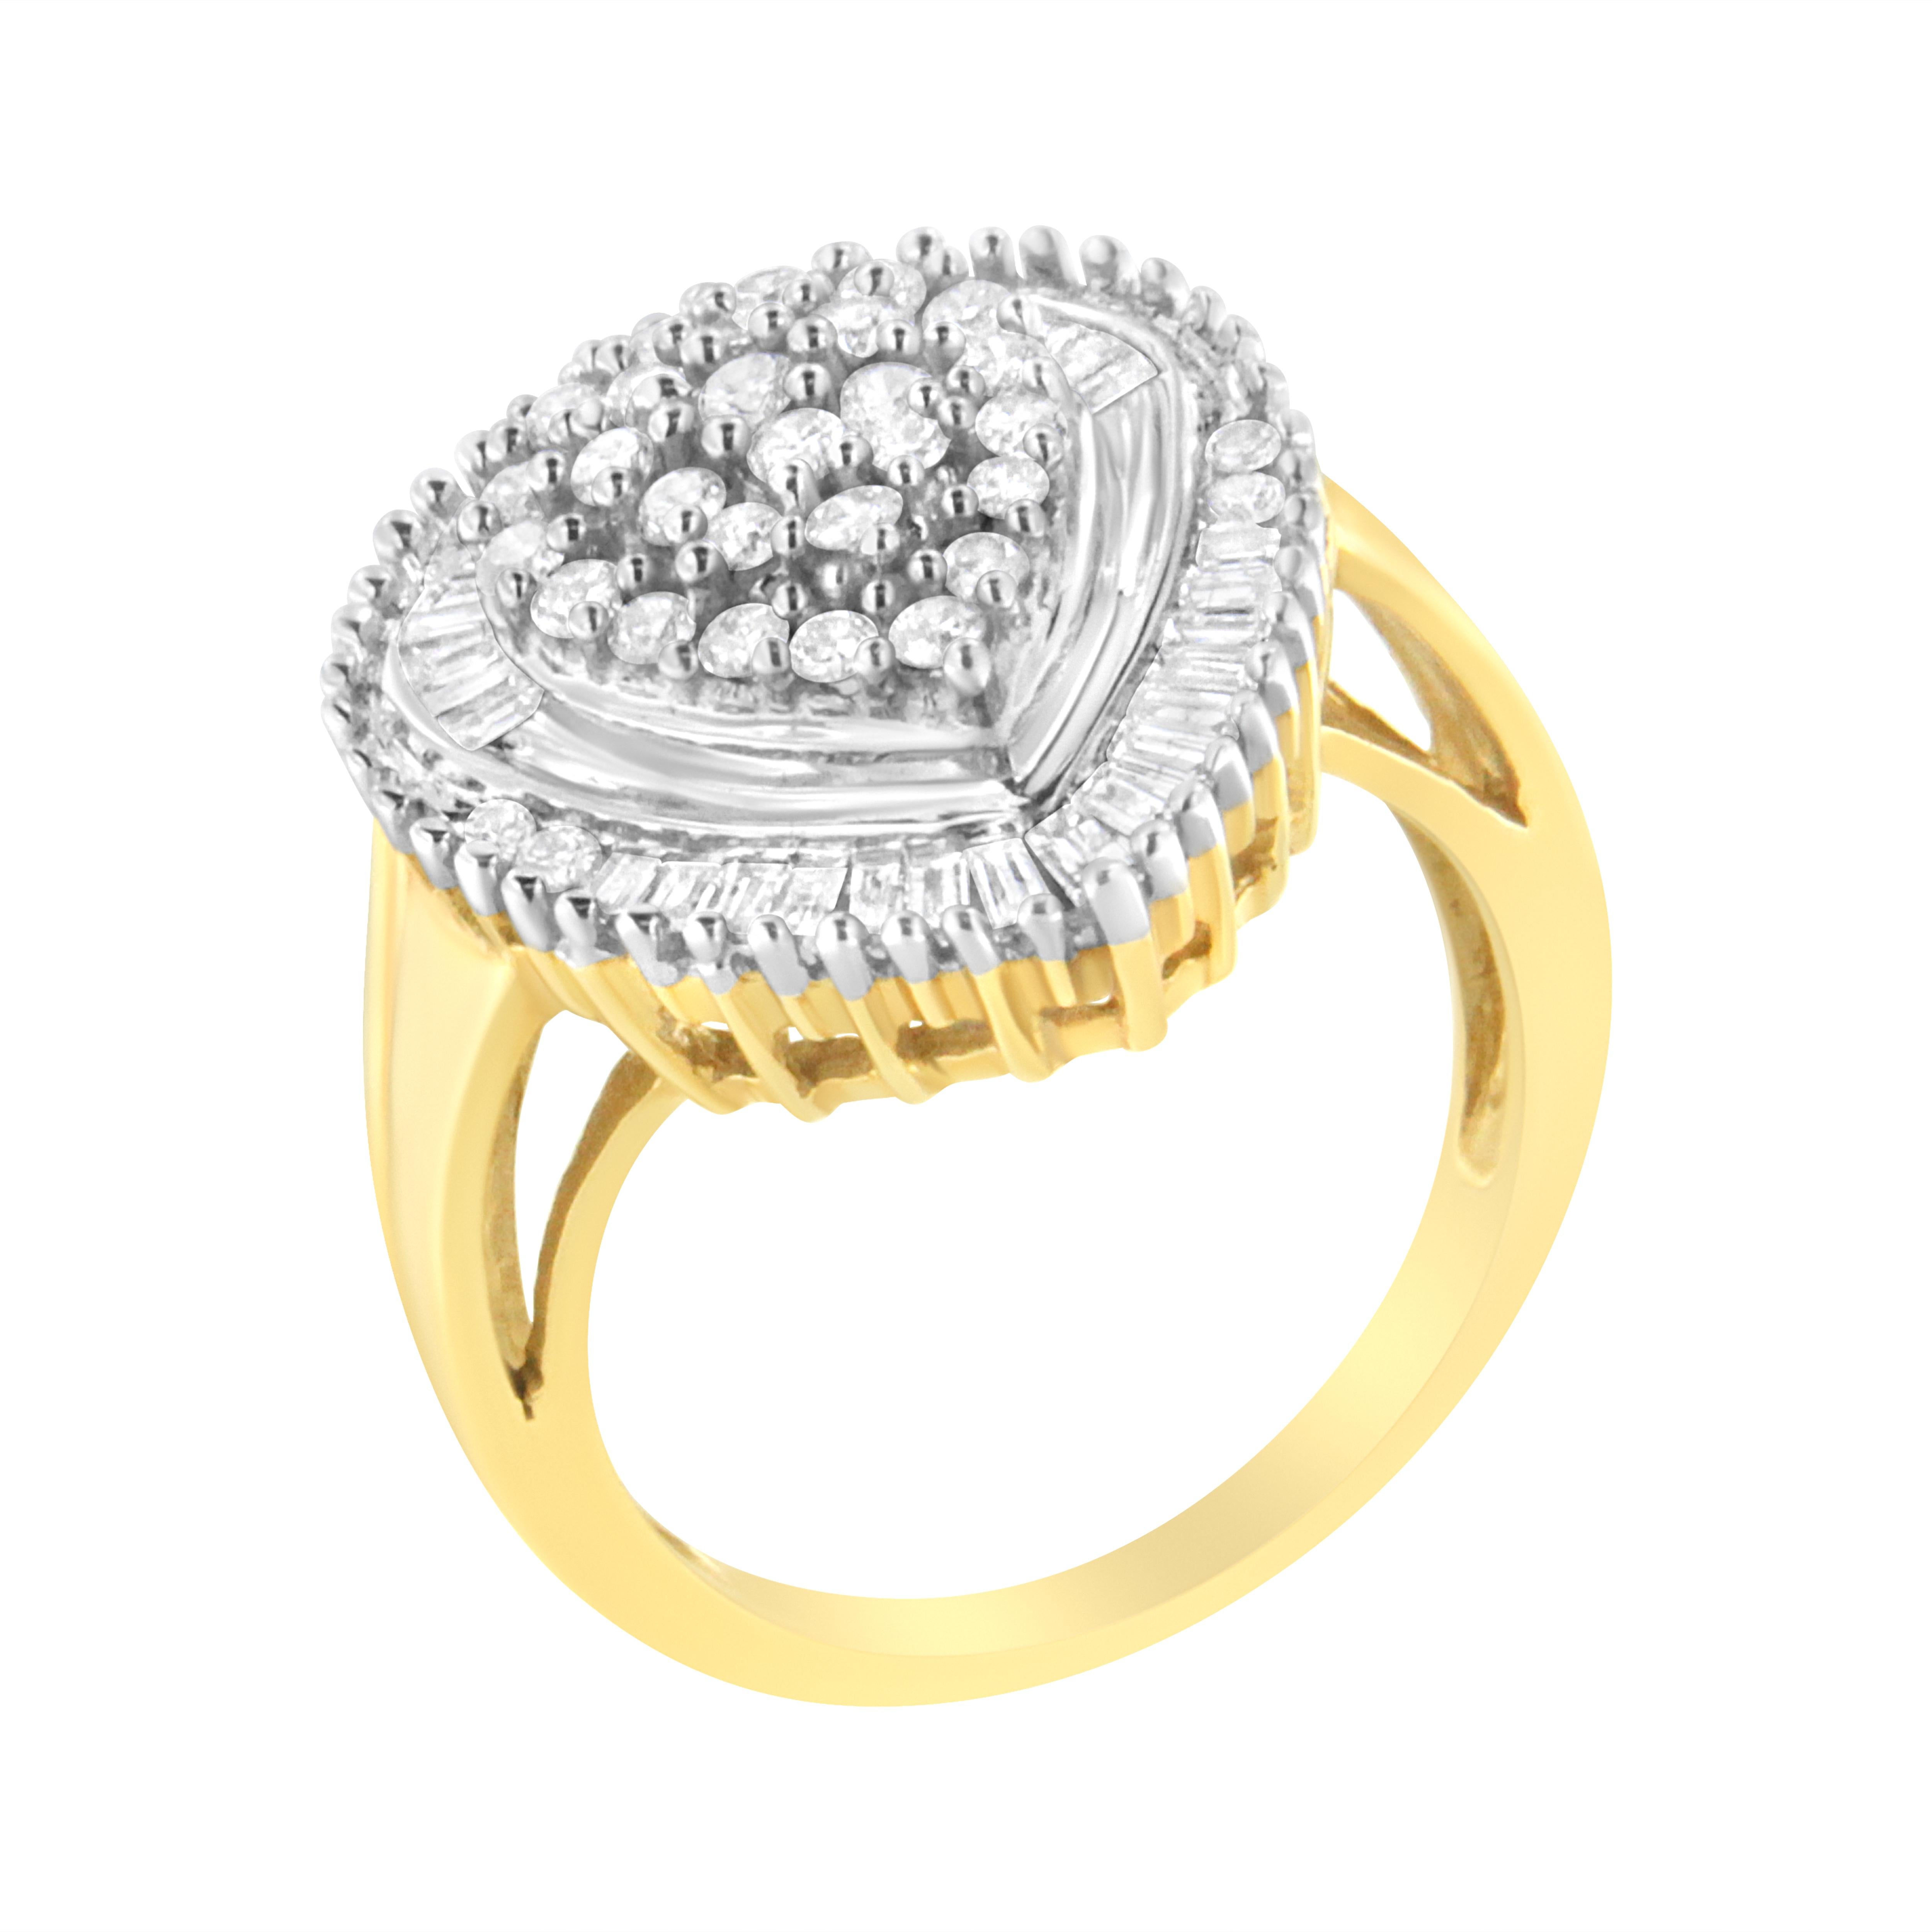 For Sale:  10K Yellow Gold 1.0 Cttw Round and Baguette Cut Diamond Oval Shaped Cluster Ring 4